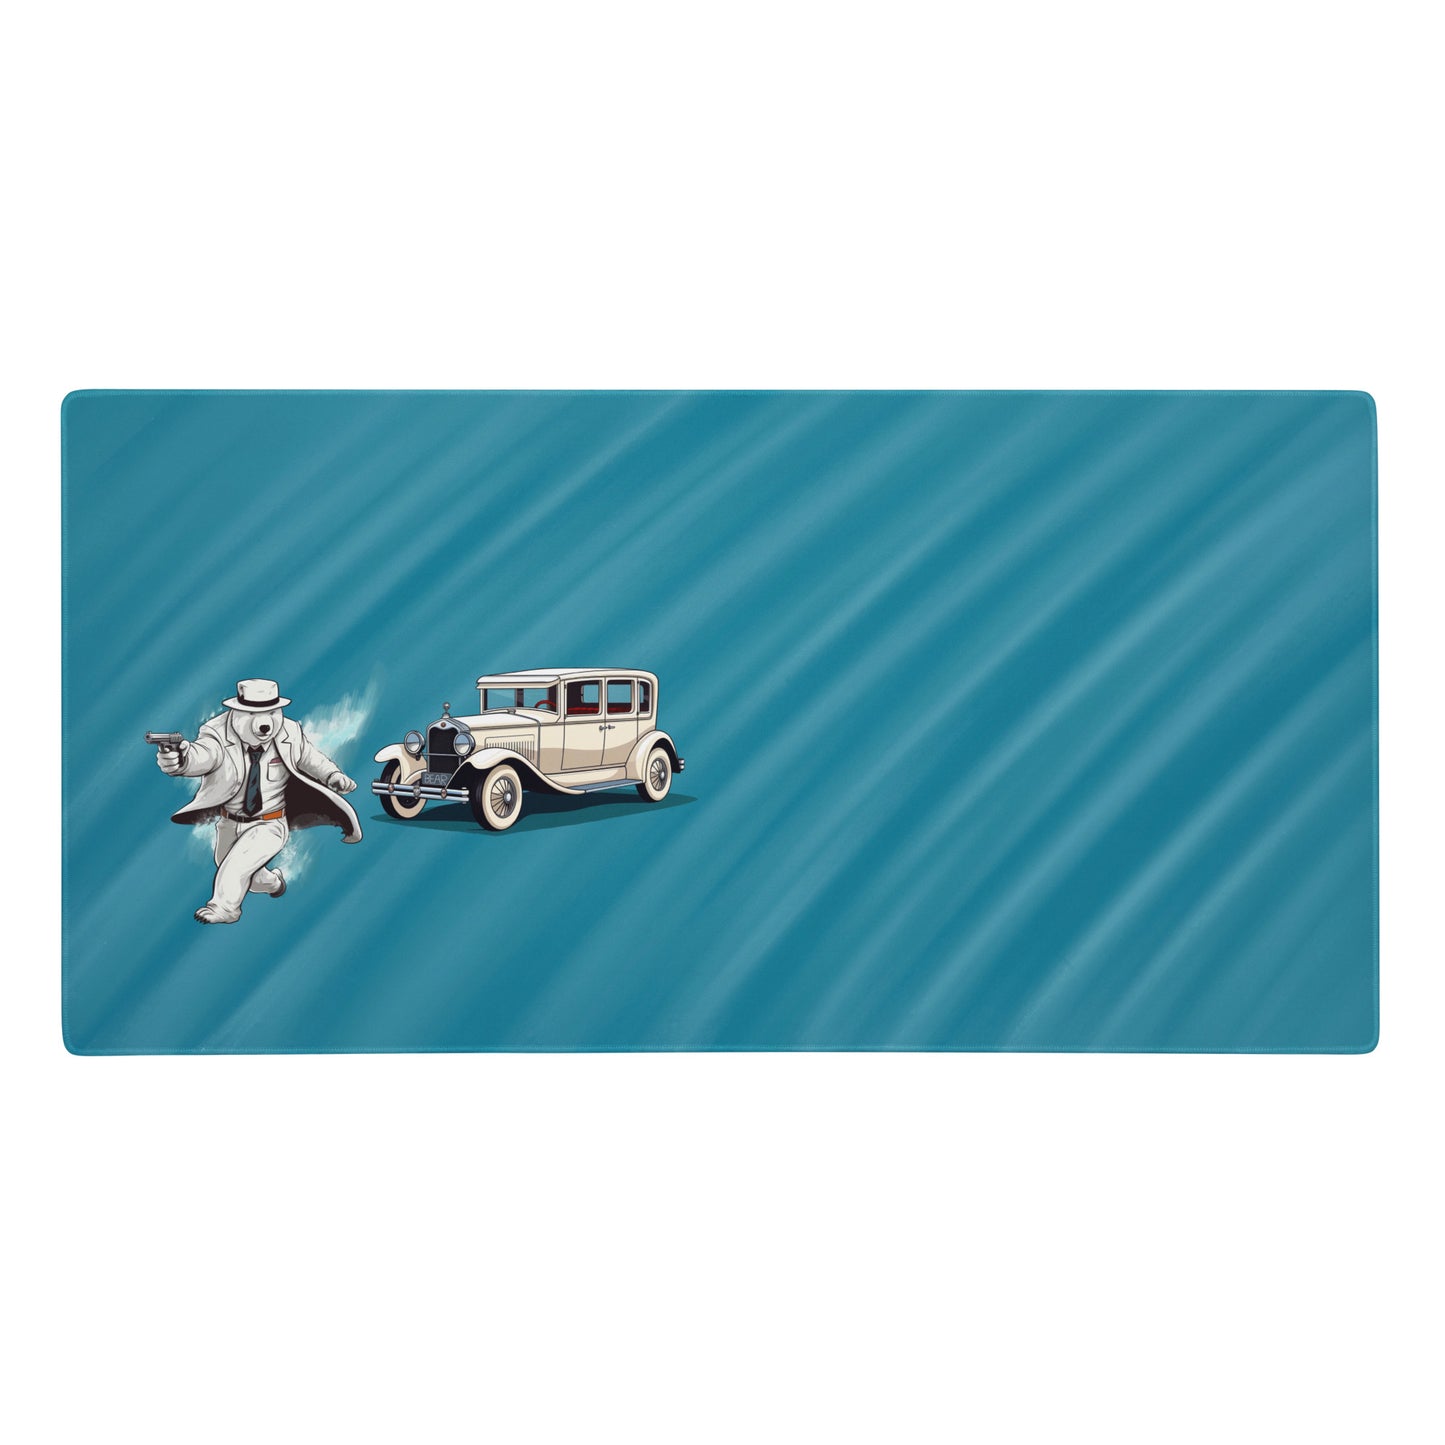 A 36" x 18" desk pad with a gangster polar bear and his car on the left. Blue in color.